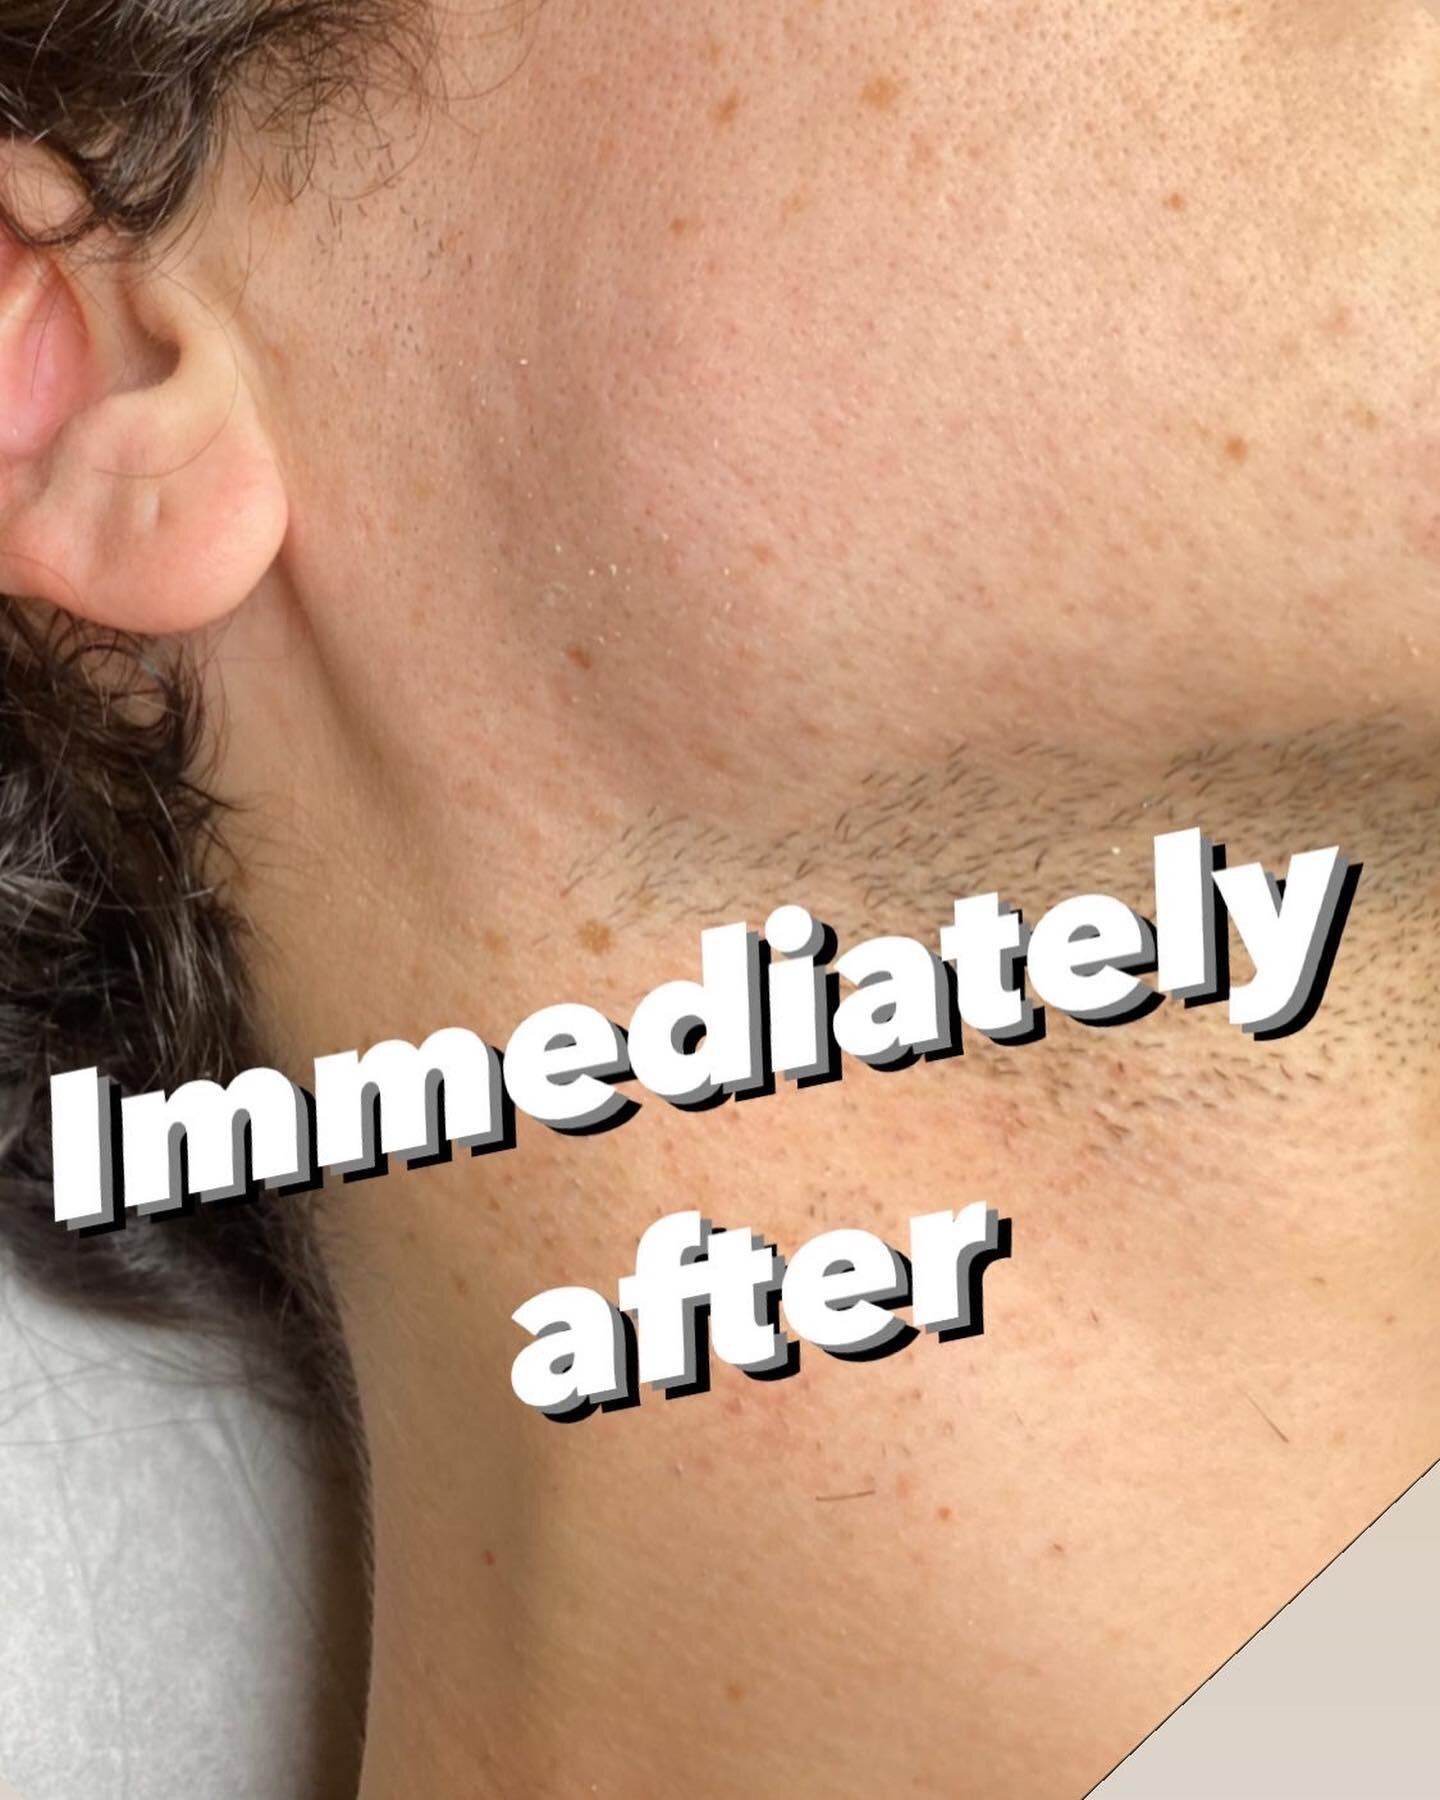 Sideburn, neck and partial beard electrolysis! A proper electrologist will prevent over treatment as much as possible via proper skills, training and technique and doing all of the above with care! #electrolysis #permanenthairremoval #facialhair #lgb